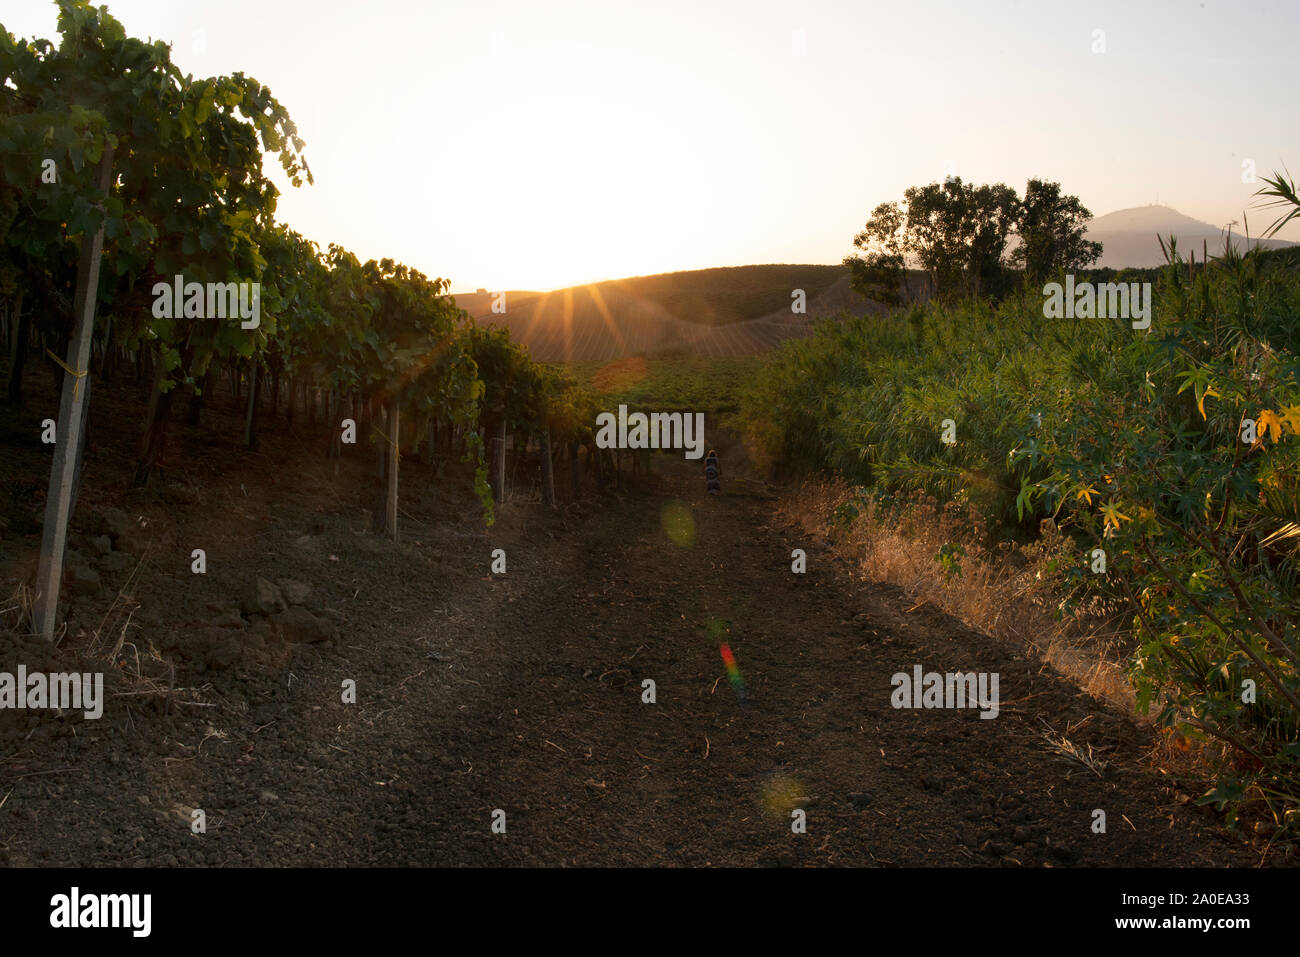 Vineyard Agriturismo, an agricultural vacation place in Sicily, Italy Stock Photo